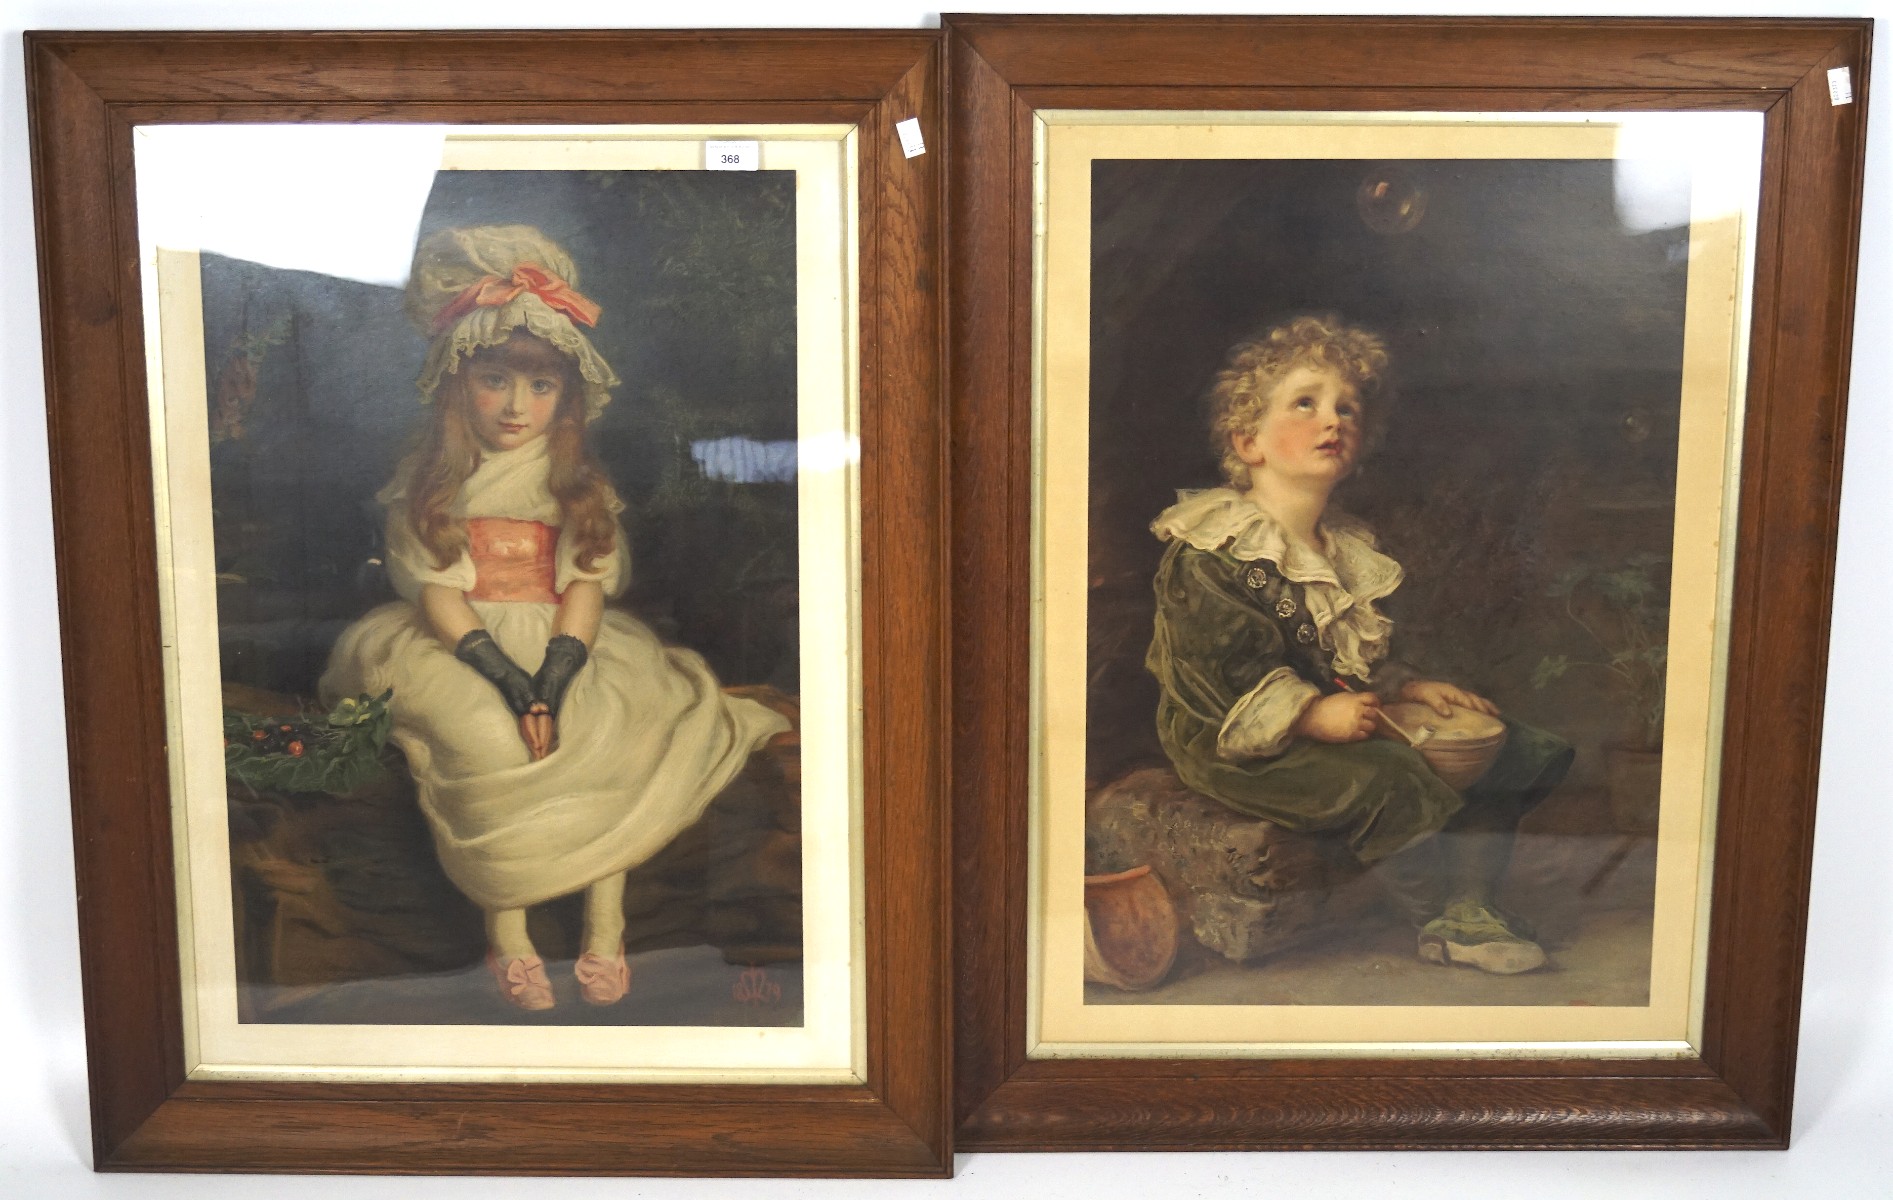 Two Pears Soap framed and glazed prints, one depicting a boy blowing bubbles,